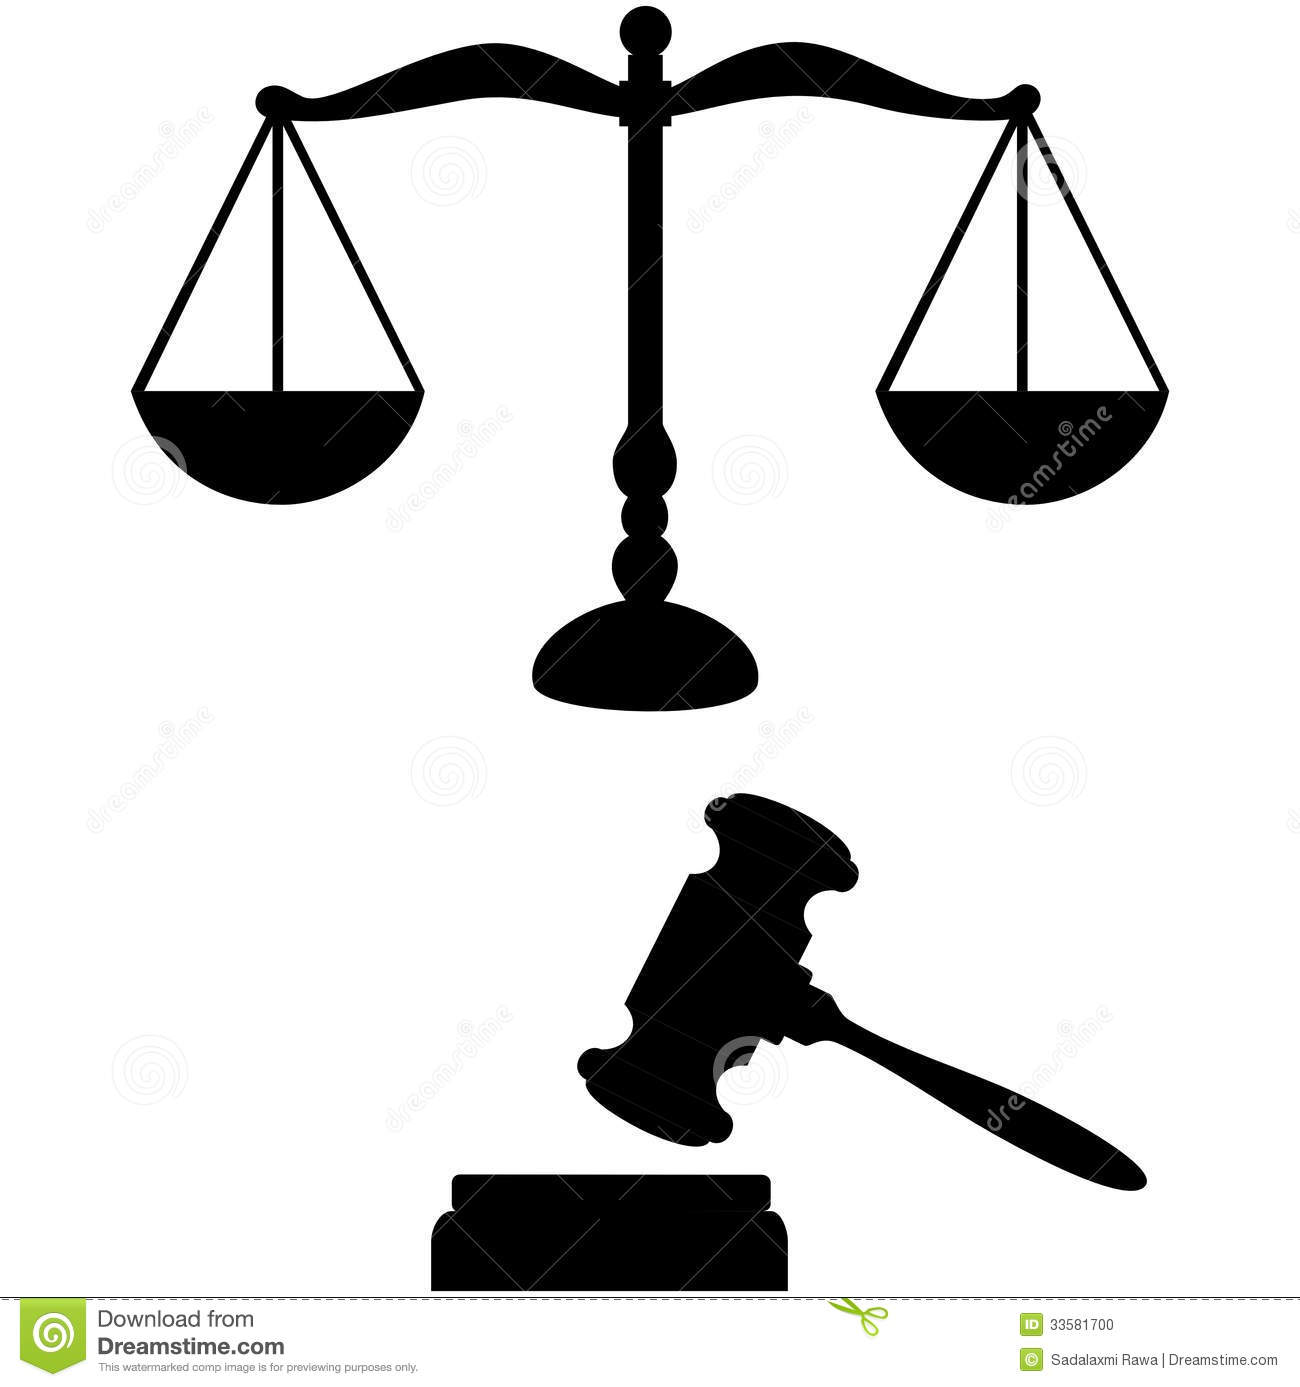 And Gavel Black Silhouette Symbols Isolated On A White Background